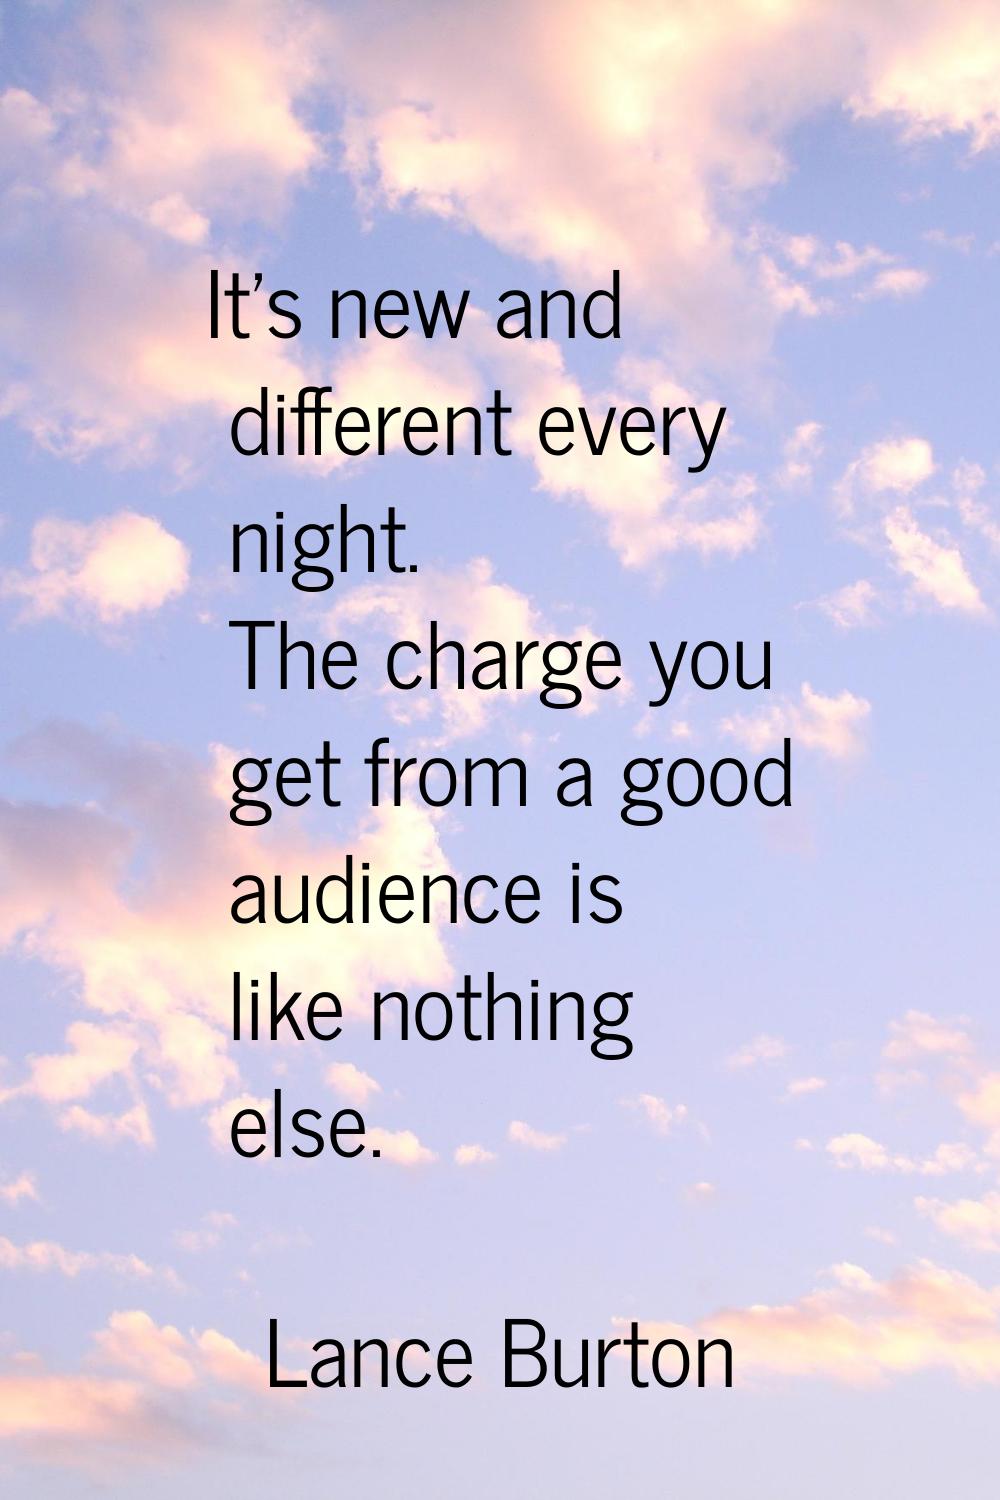 It's new and different every night. The charge you get from a good audience is like nothing else.